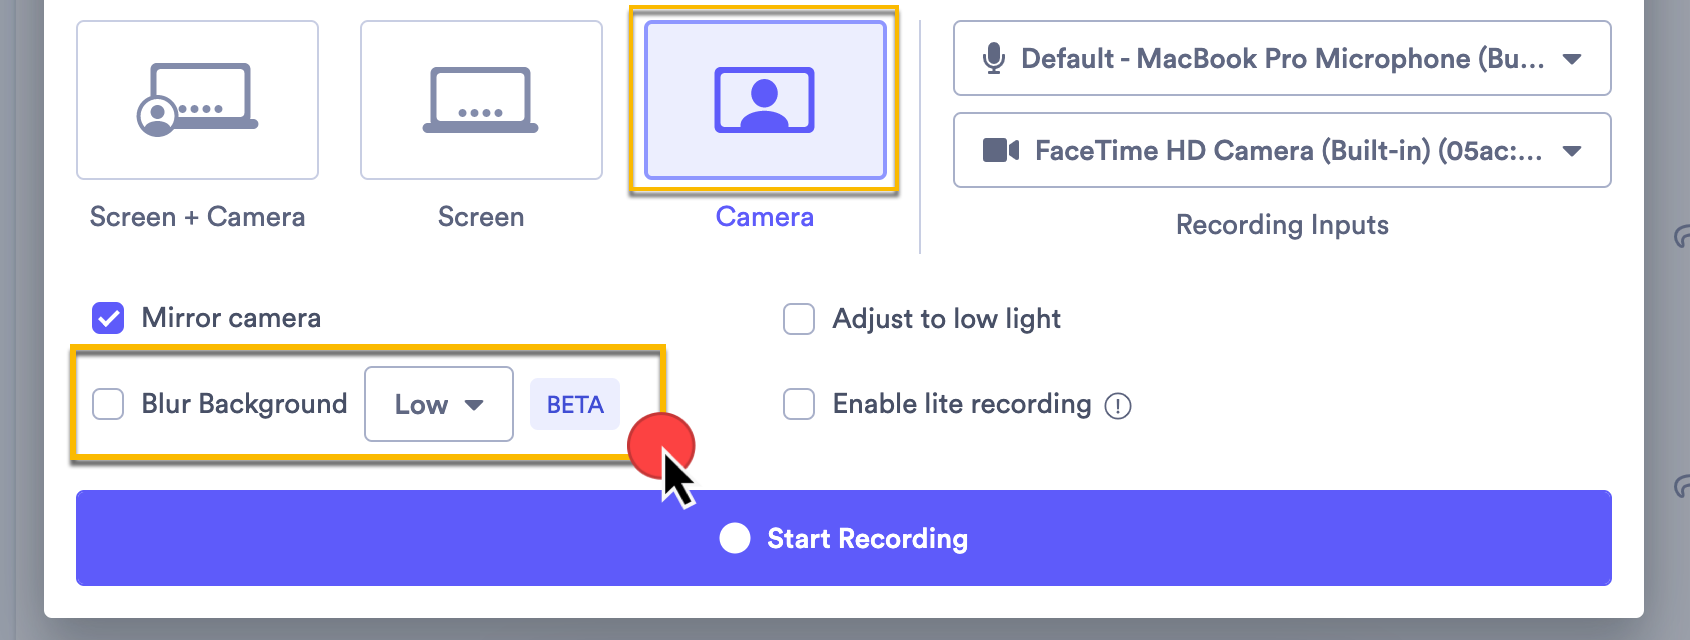 Selecting the Camera recording option, then using the checkbox to enable Blur